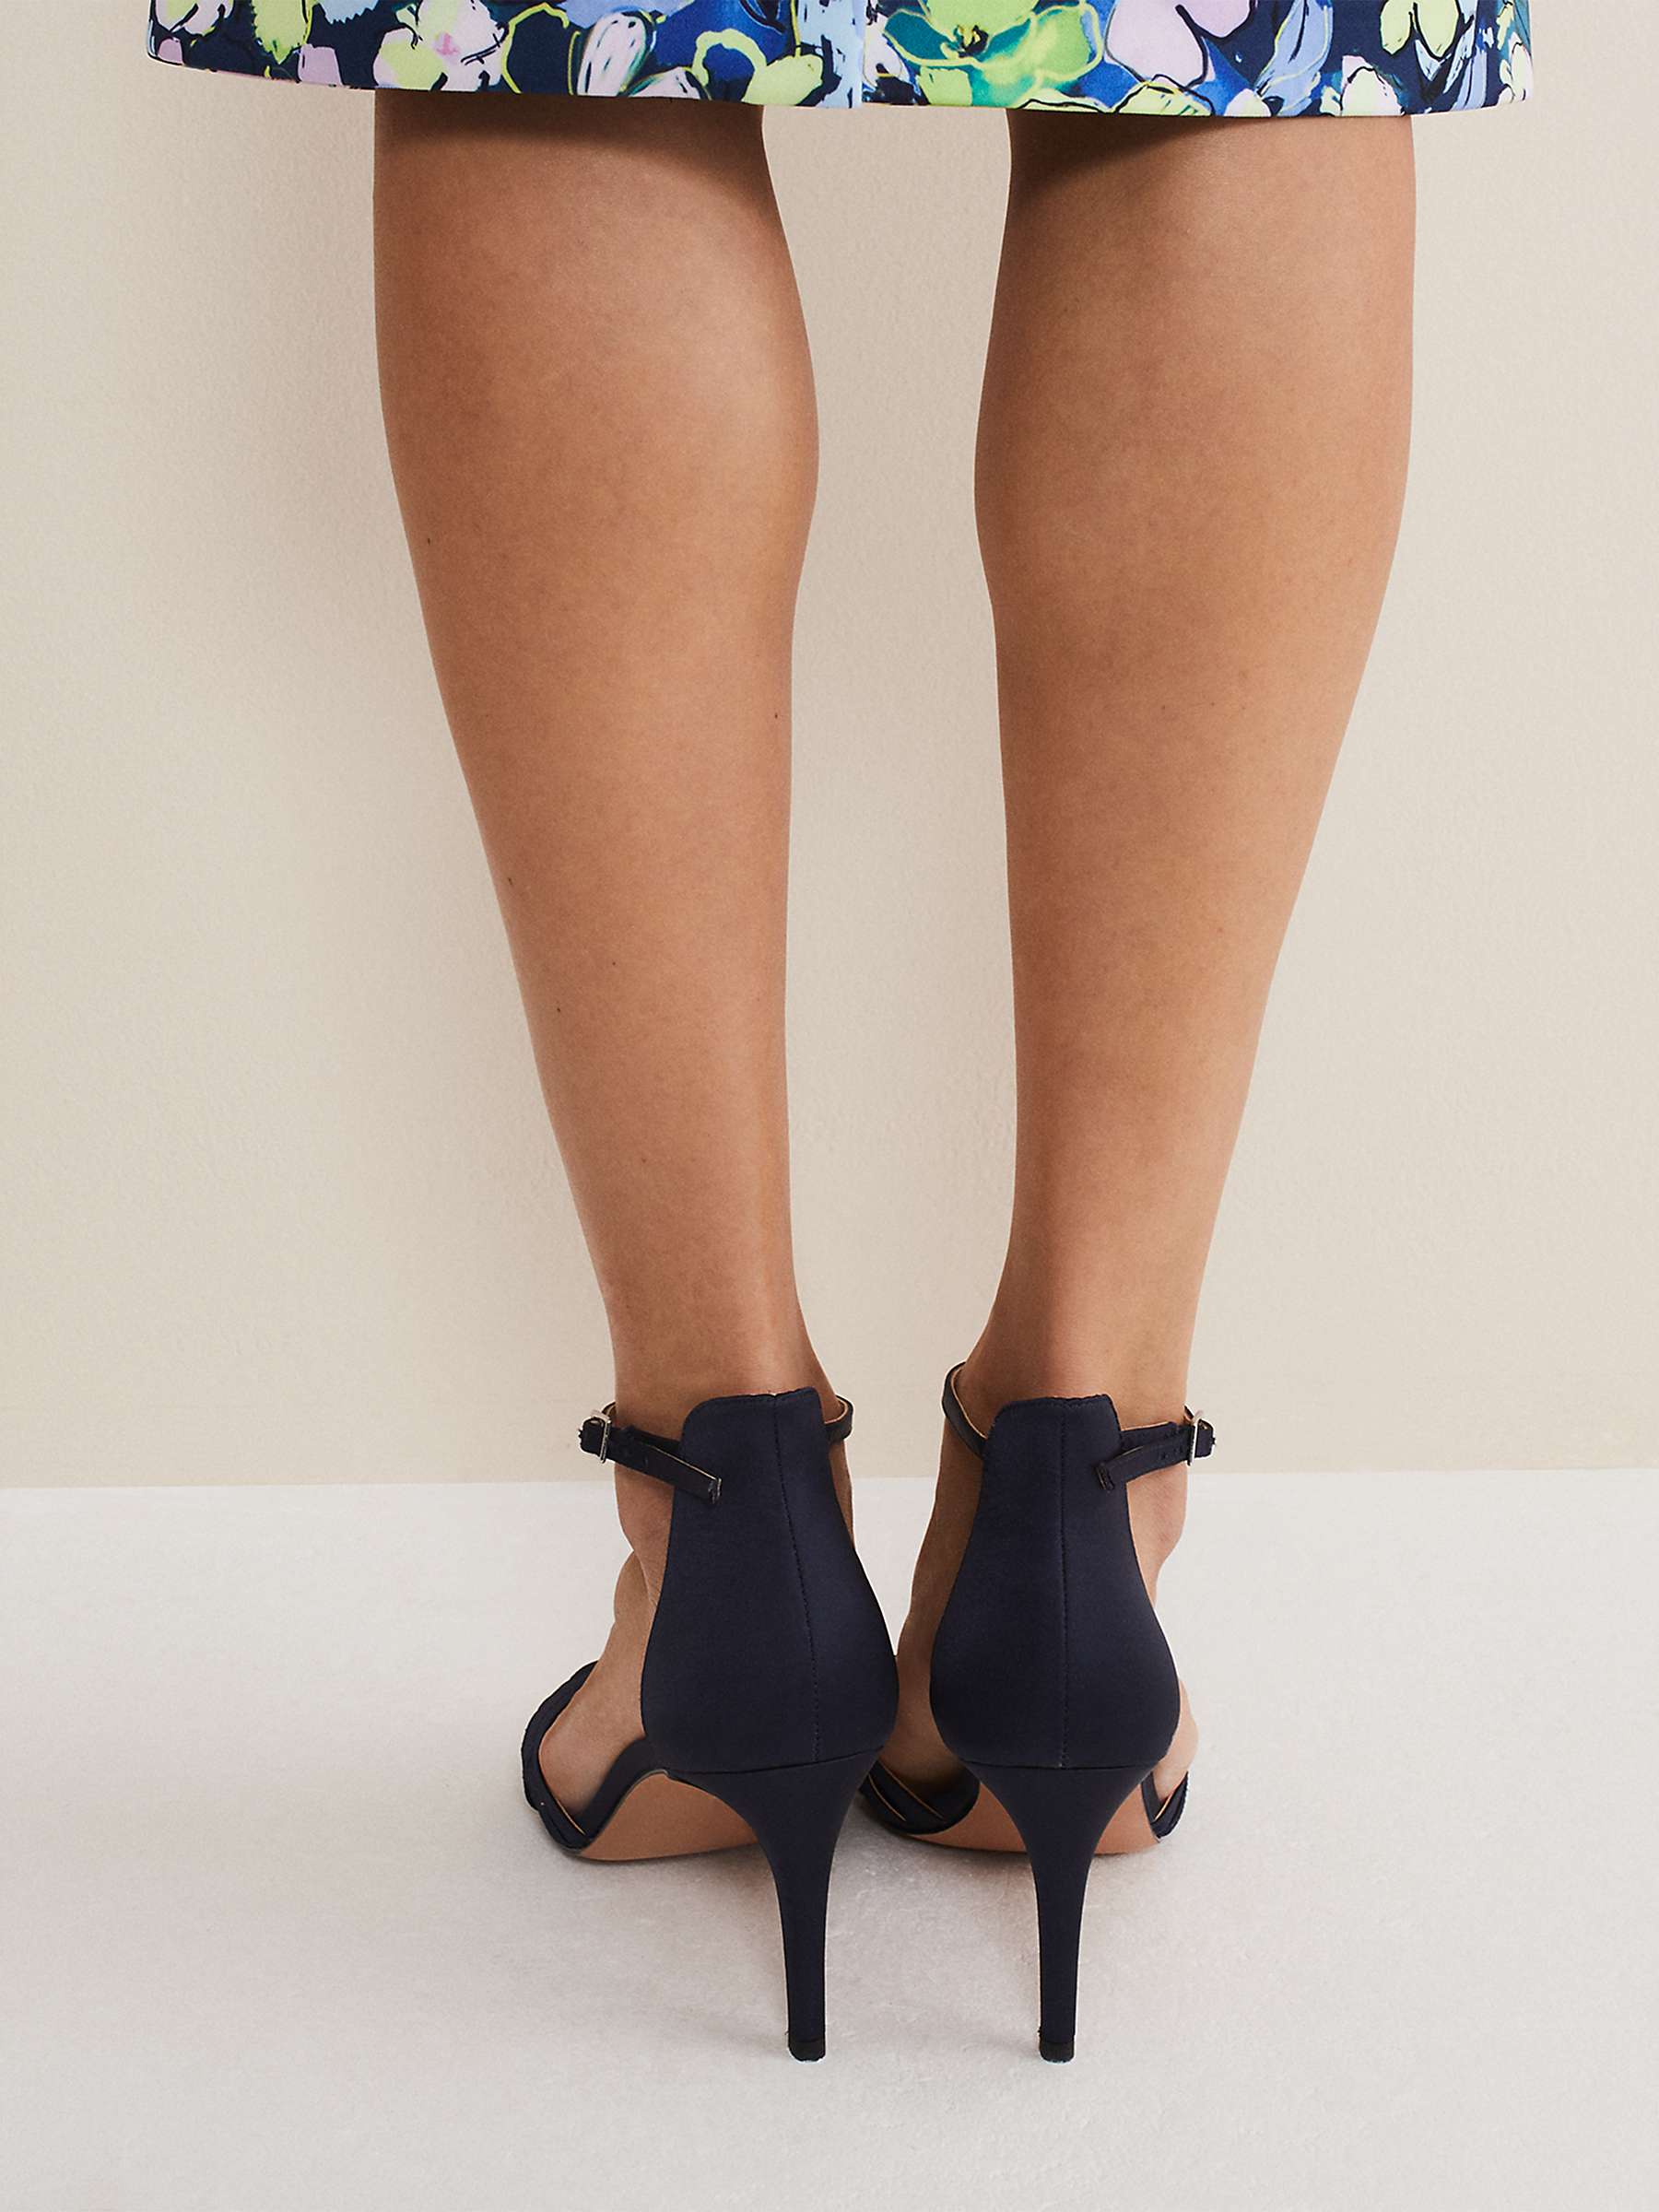 Buy Phase Eight Satin Strappy Heeled Sandals, French Navy Online at johnlewis.com